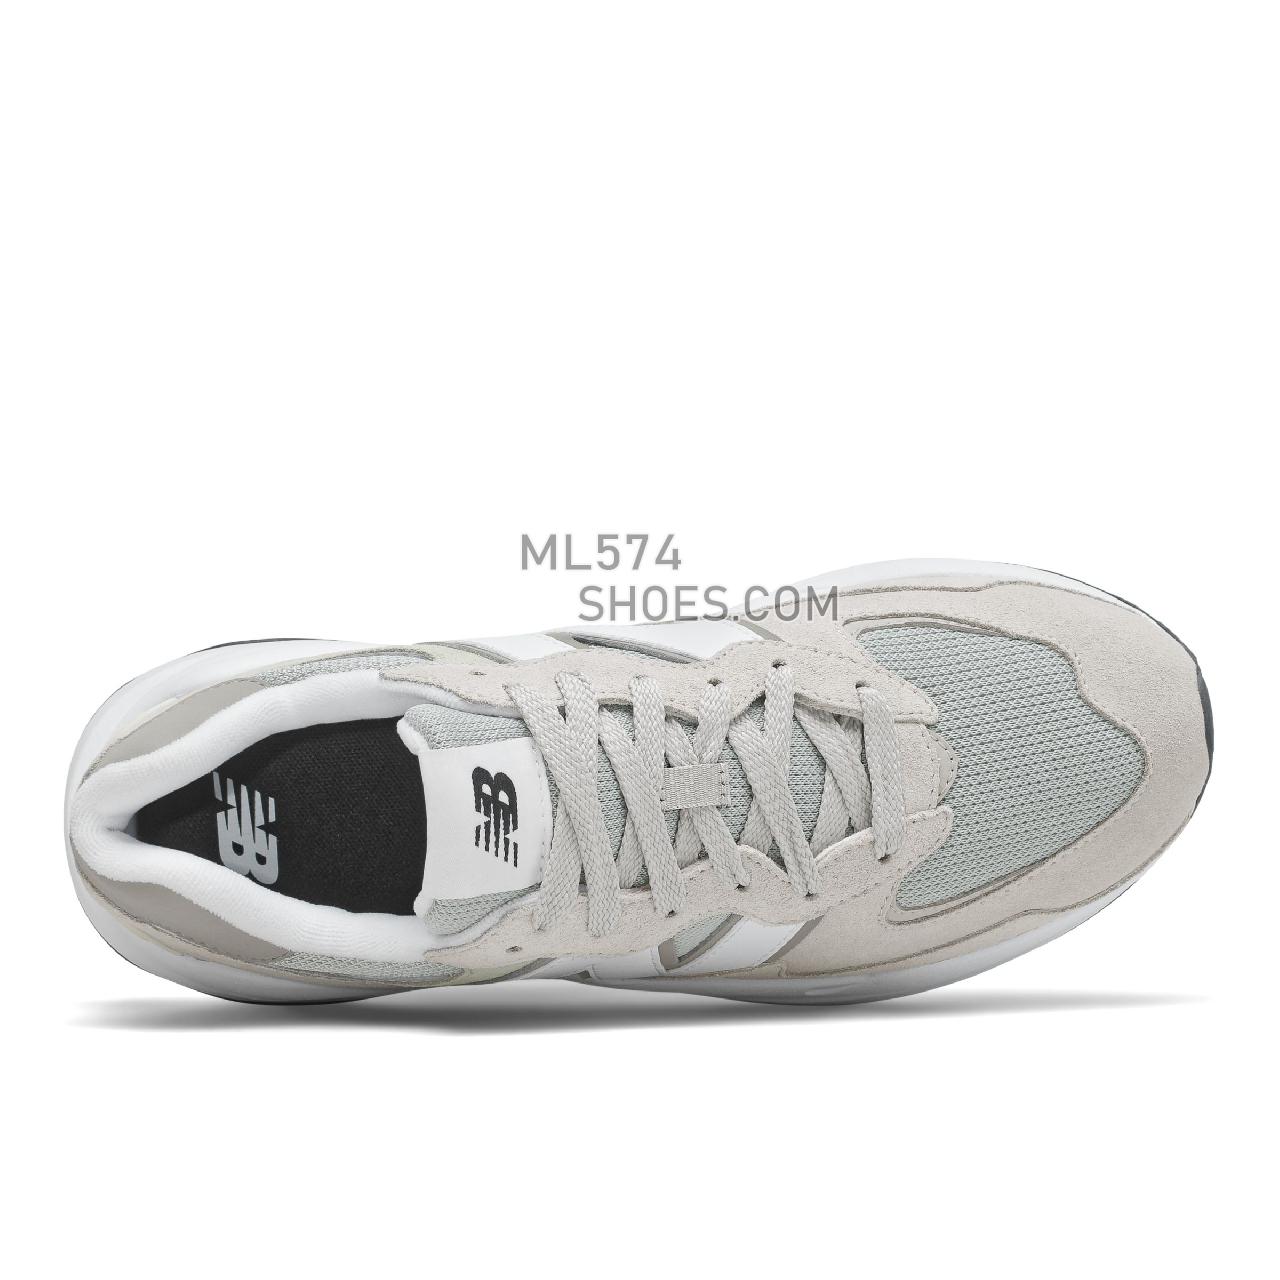 New Balance 57/40 - Men's Sport Style Sneakers - Rain Cloud with Nb White - M5740CA